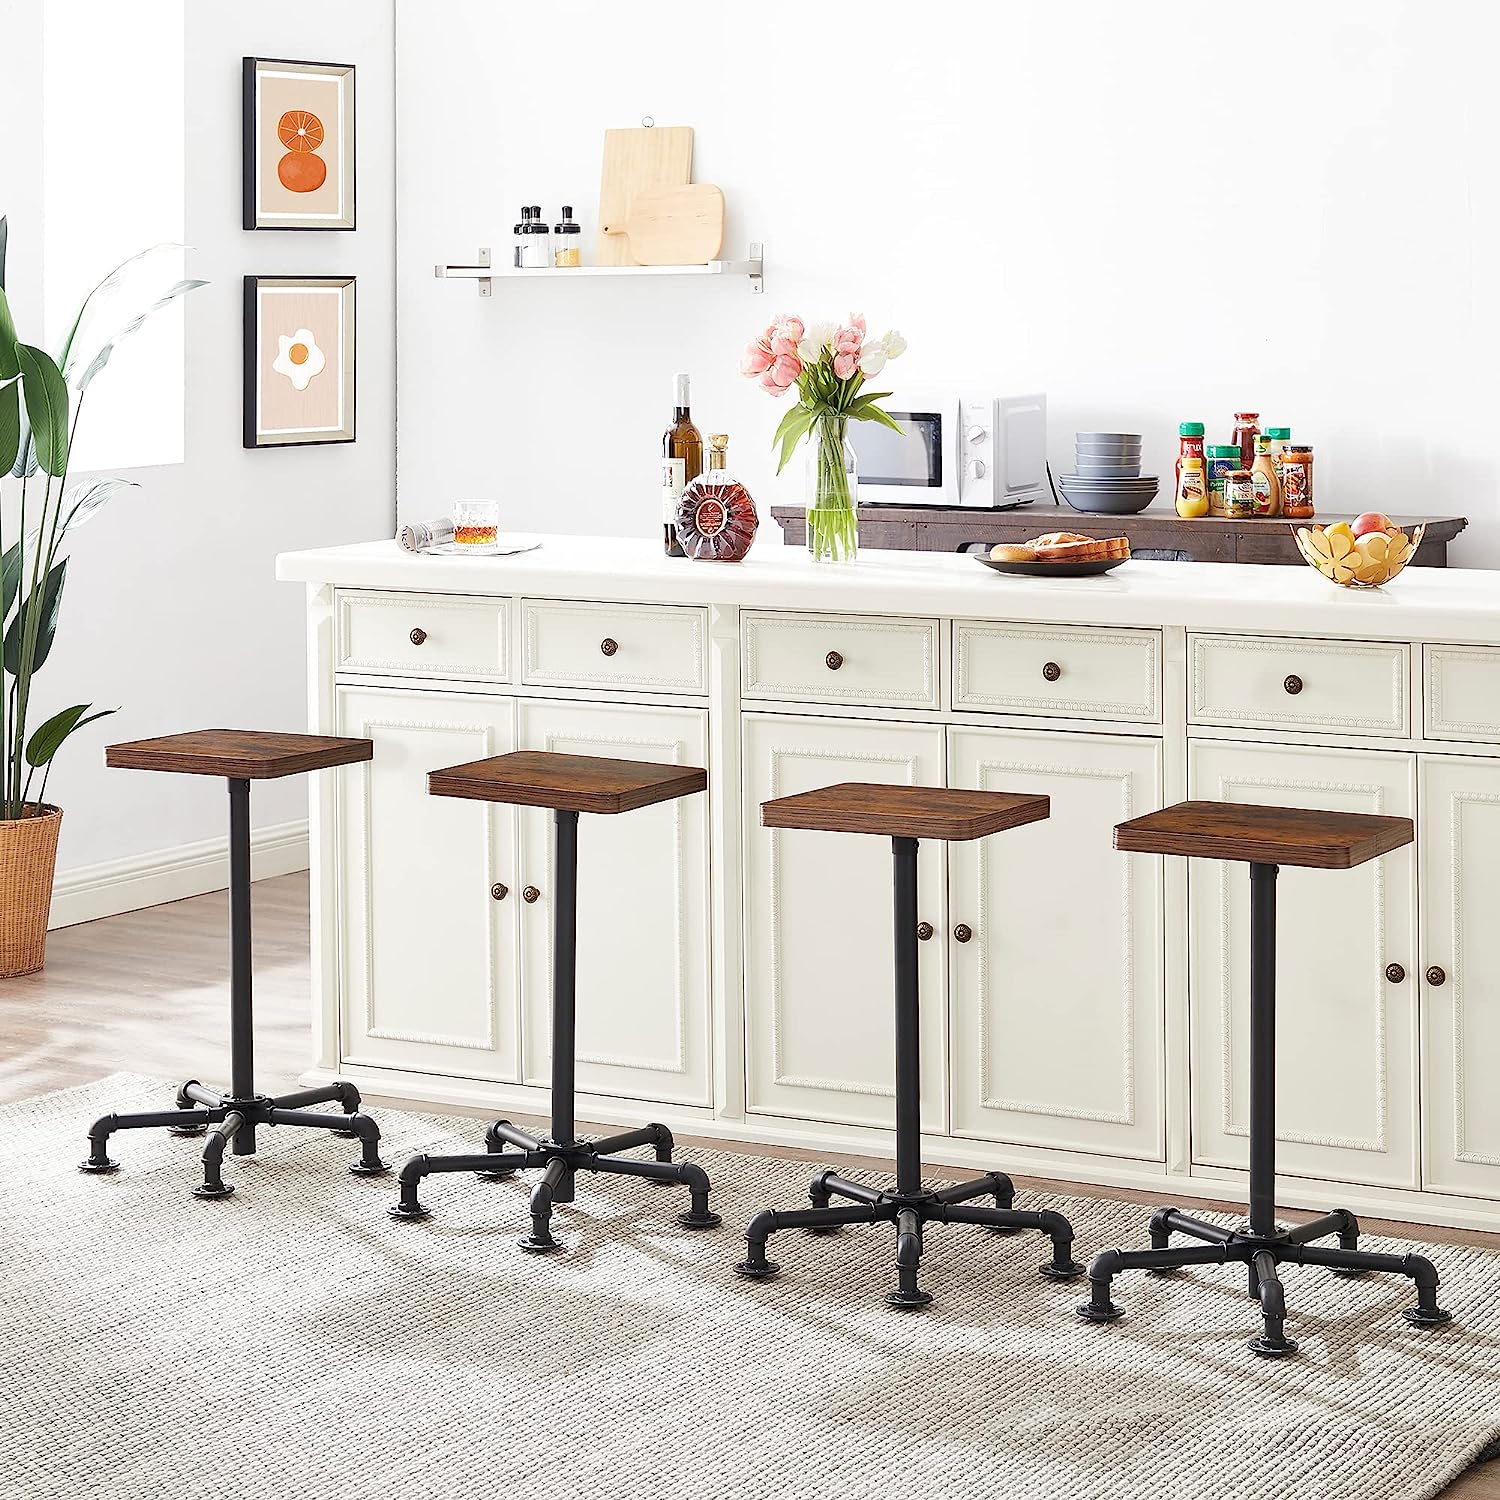 VECELO Counter Height Bar Stools Set of 2